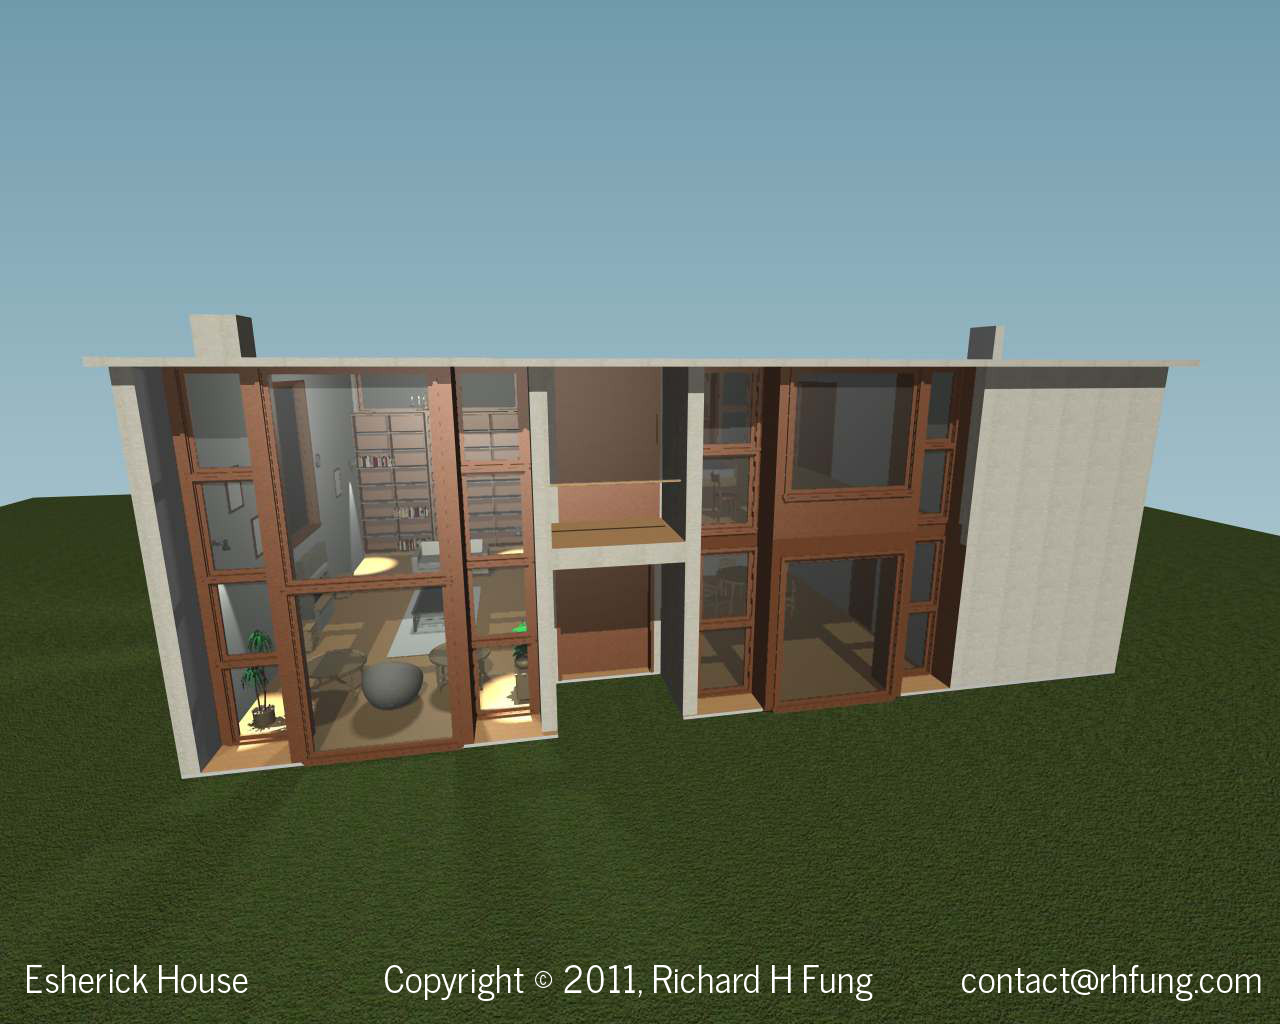 Esherick House back of house in 3D rendering